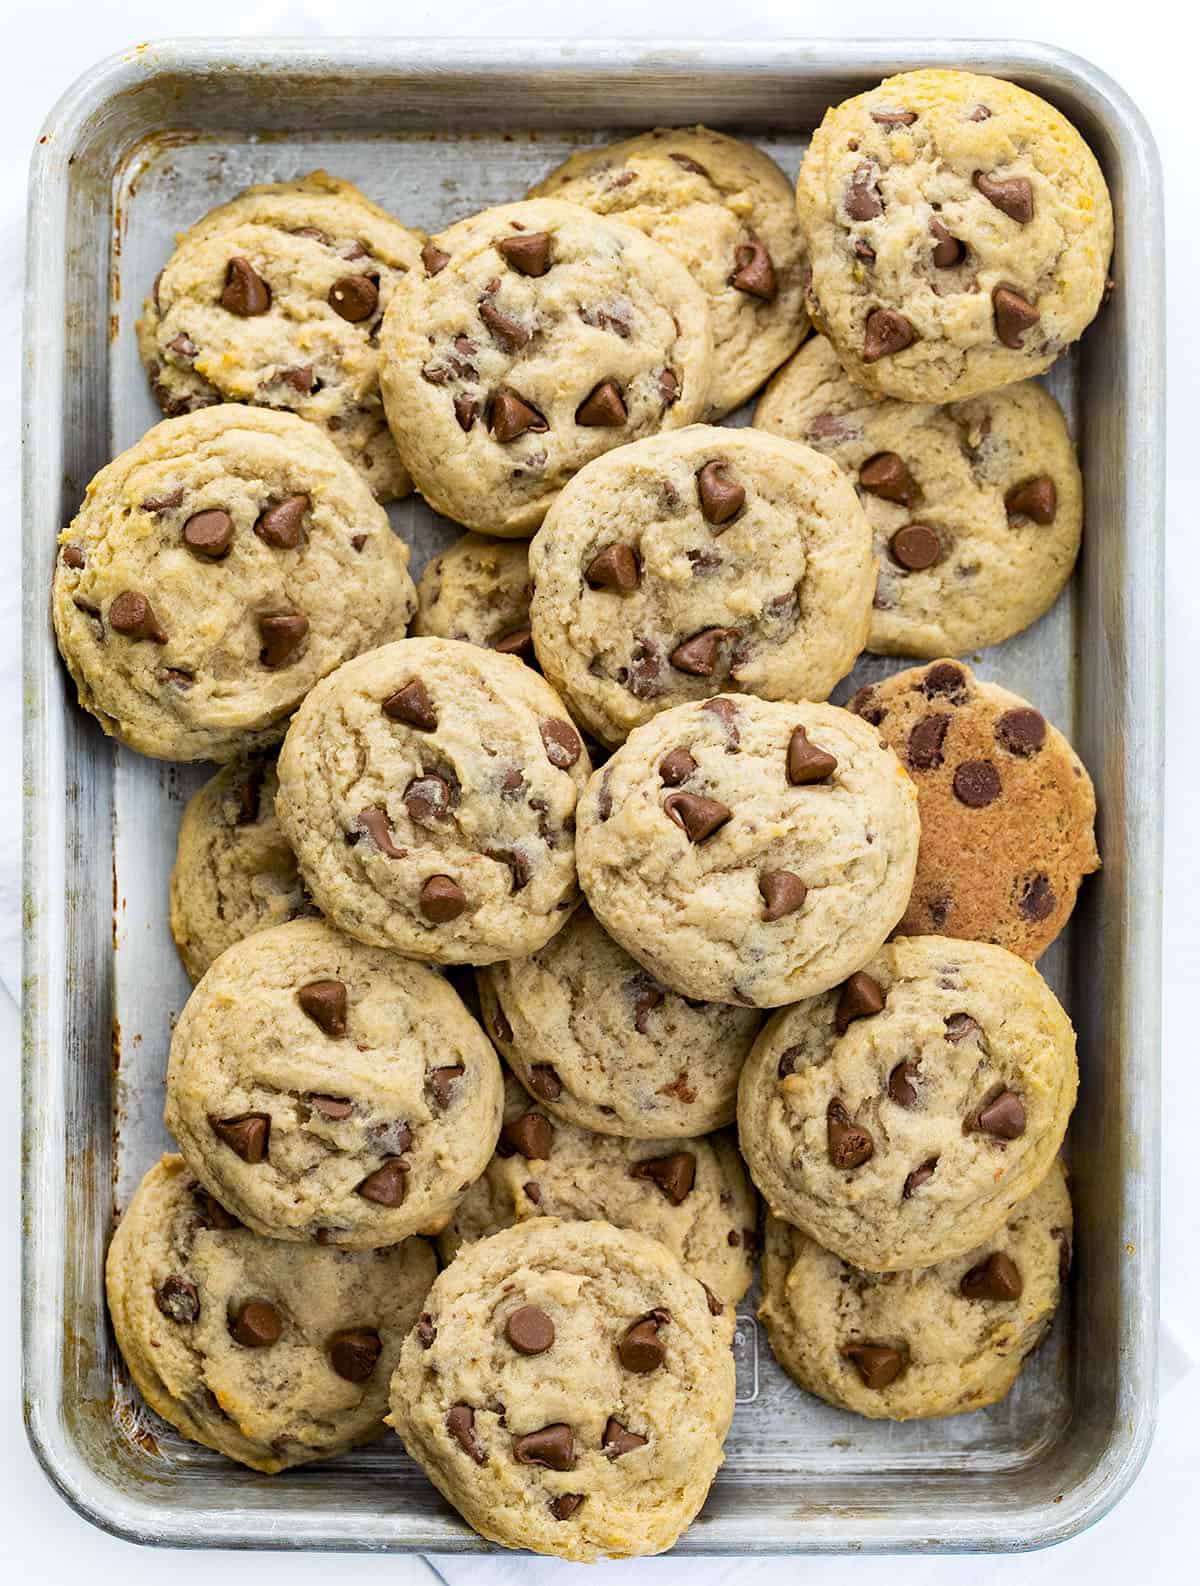 Banana Chocolate Chip Cookies From Overhead on a Pan. Cookies, Cookie Recipes, Baking, Chocolage Chip Cookies, Banana Cookies, Dessert, Banana Desserts, Cookie Exchange, Chewey Cookies, i am baker, iambaker